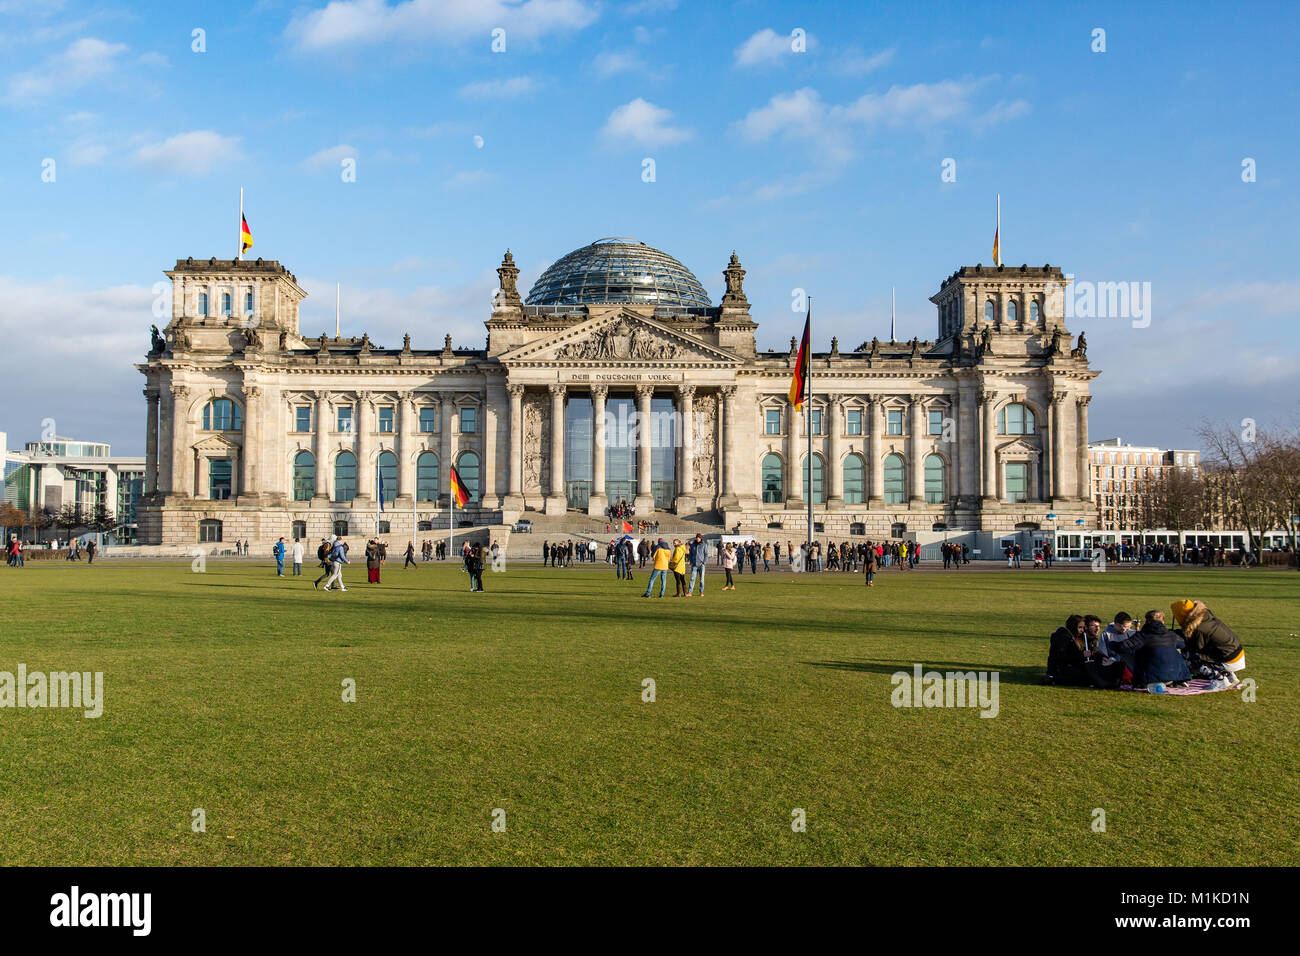 Reichstag historic building in Berlin is the meeting place of the Bundestag, the lower house of Germany’s national legislature. Blue sky Stock Photo